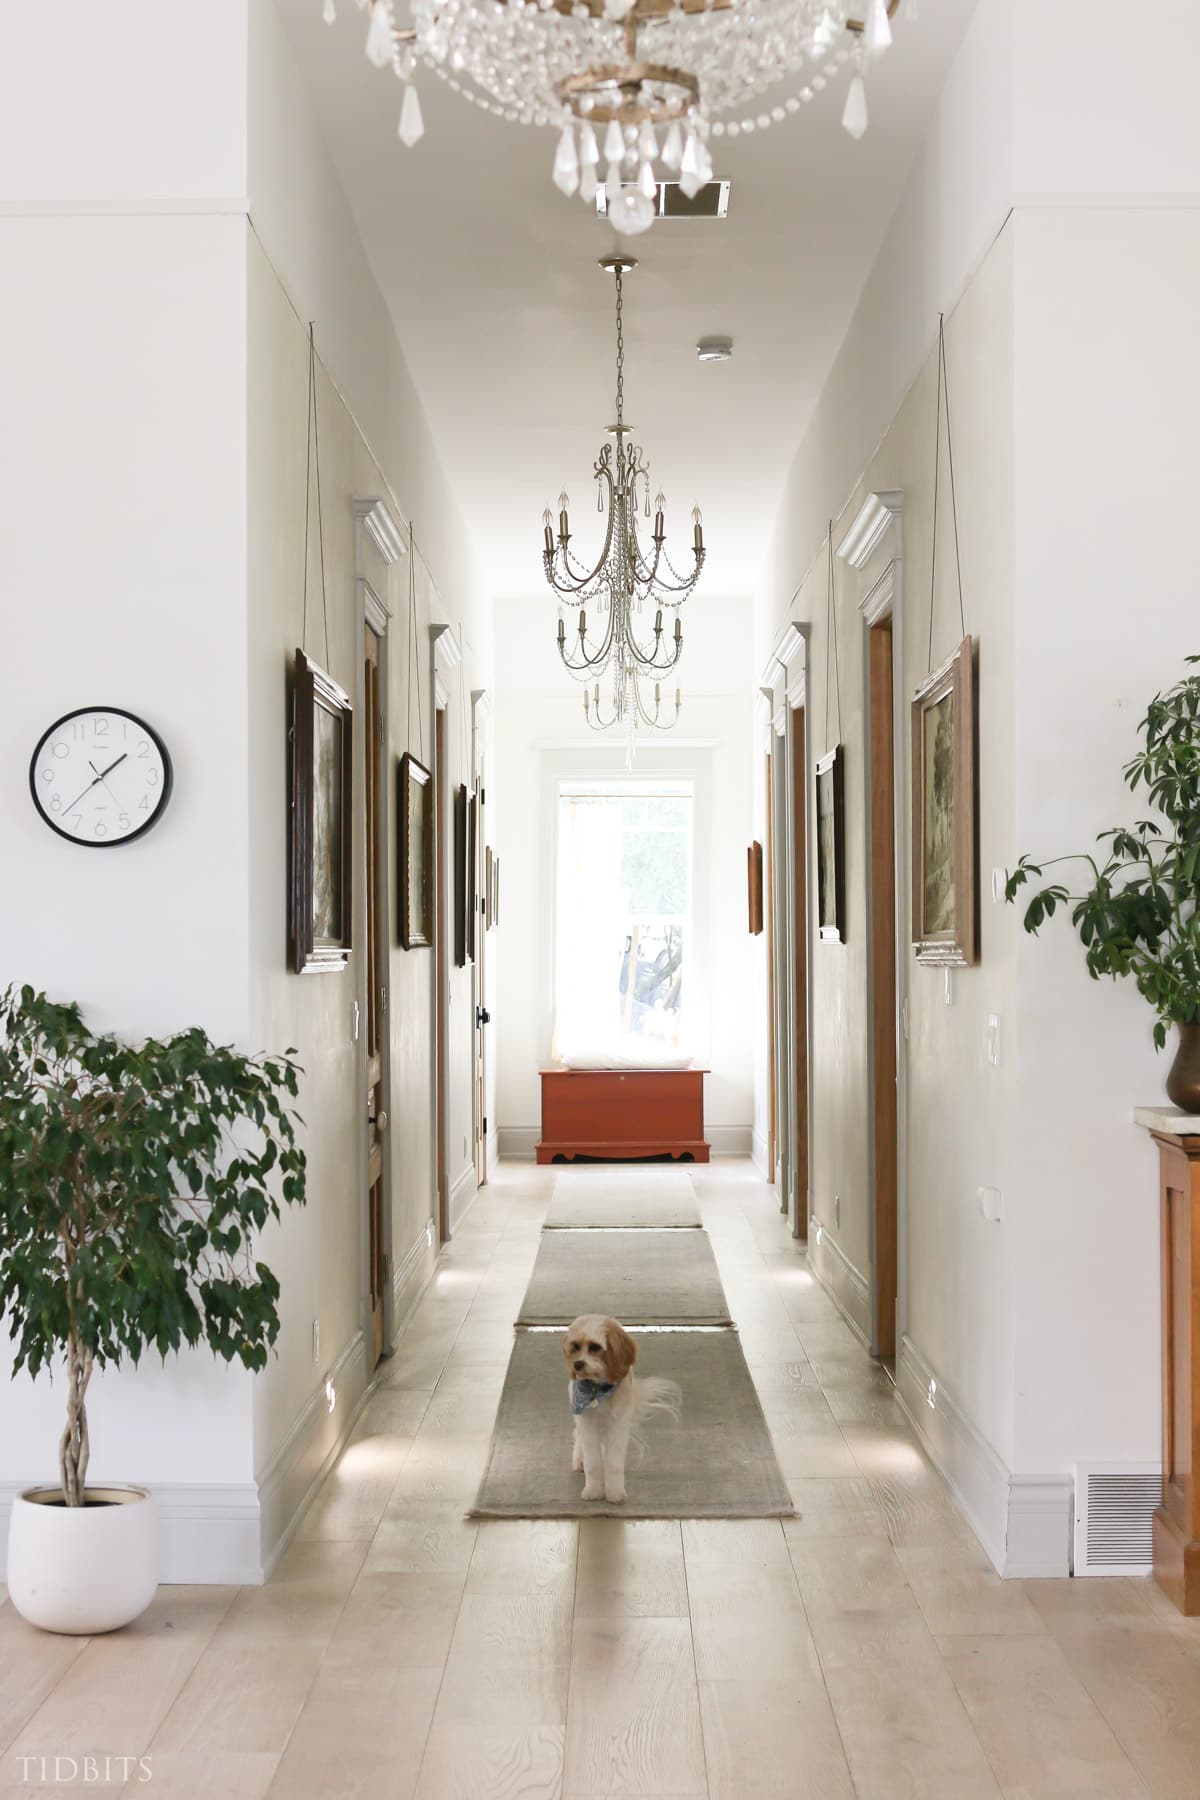 Chandeliers, large wall art ideas and rugs in a hallway